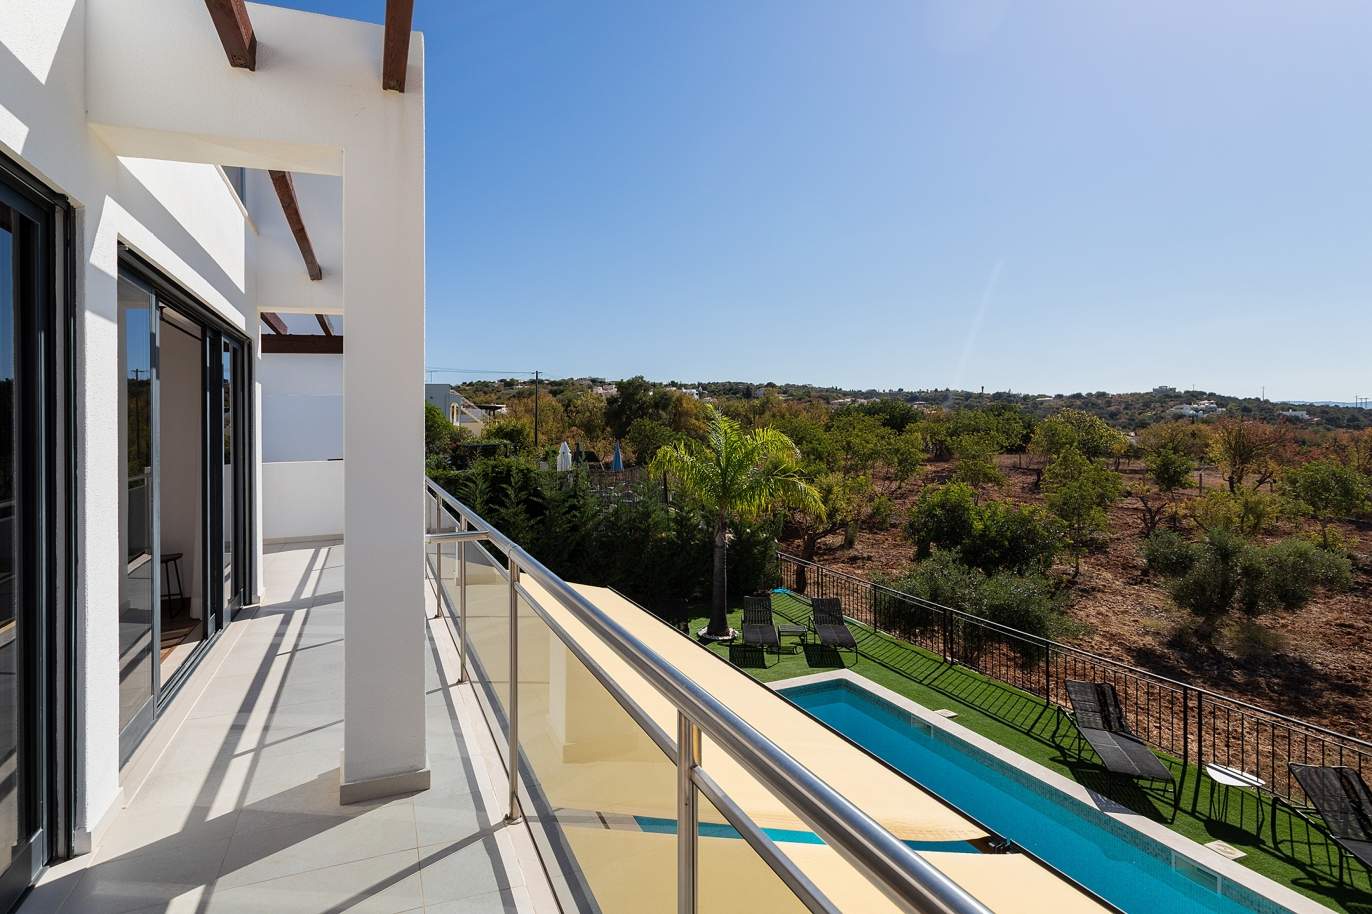 New Villa with 4 bedrooms, sea and mountain view, Loulé, Algarve_179027